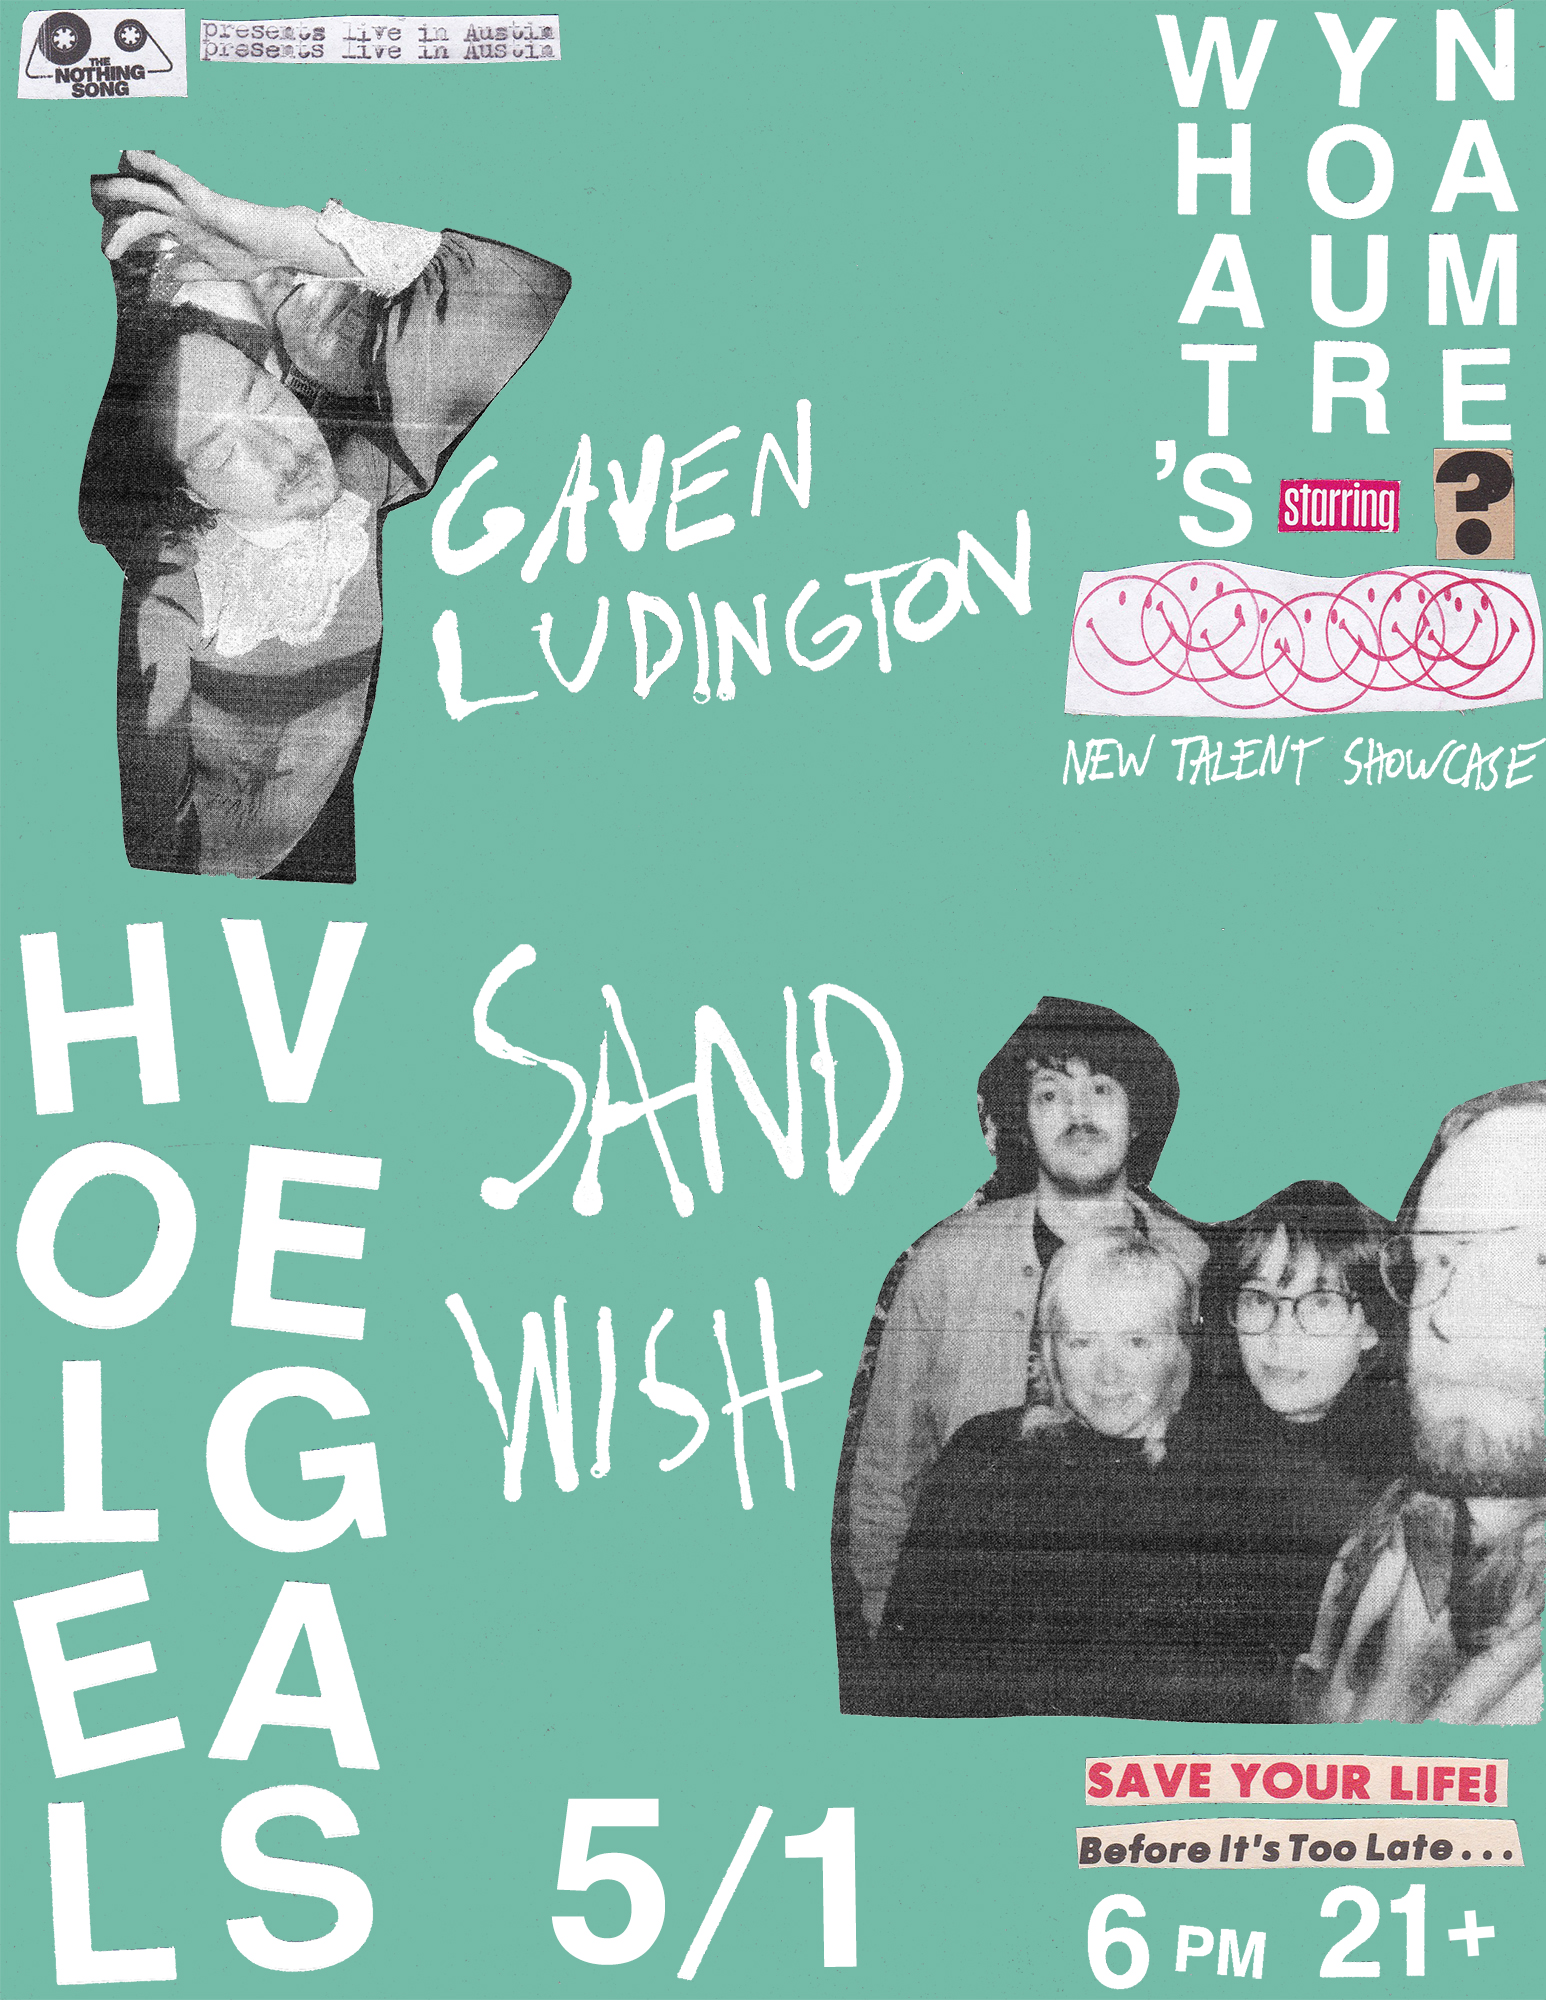 The Nothing Song Presents: What's Your Name? A Showcase of New Talent ft. Sand Wish & Gaven Ludington